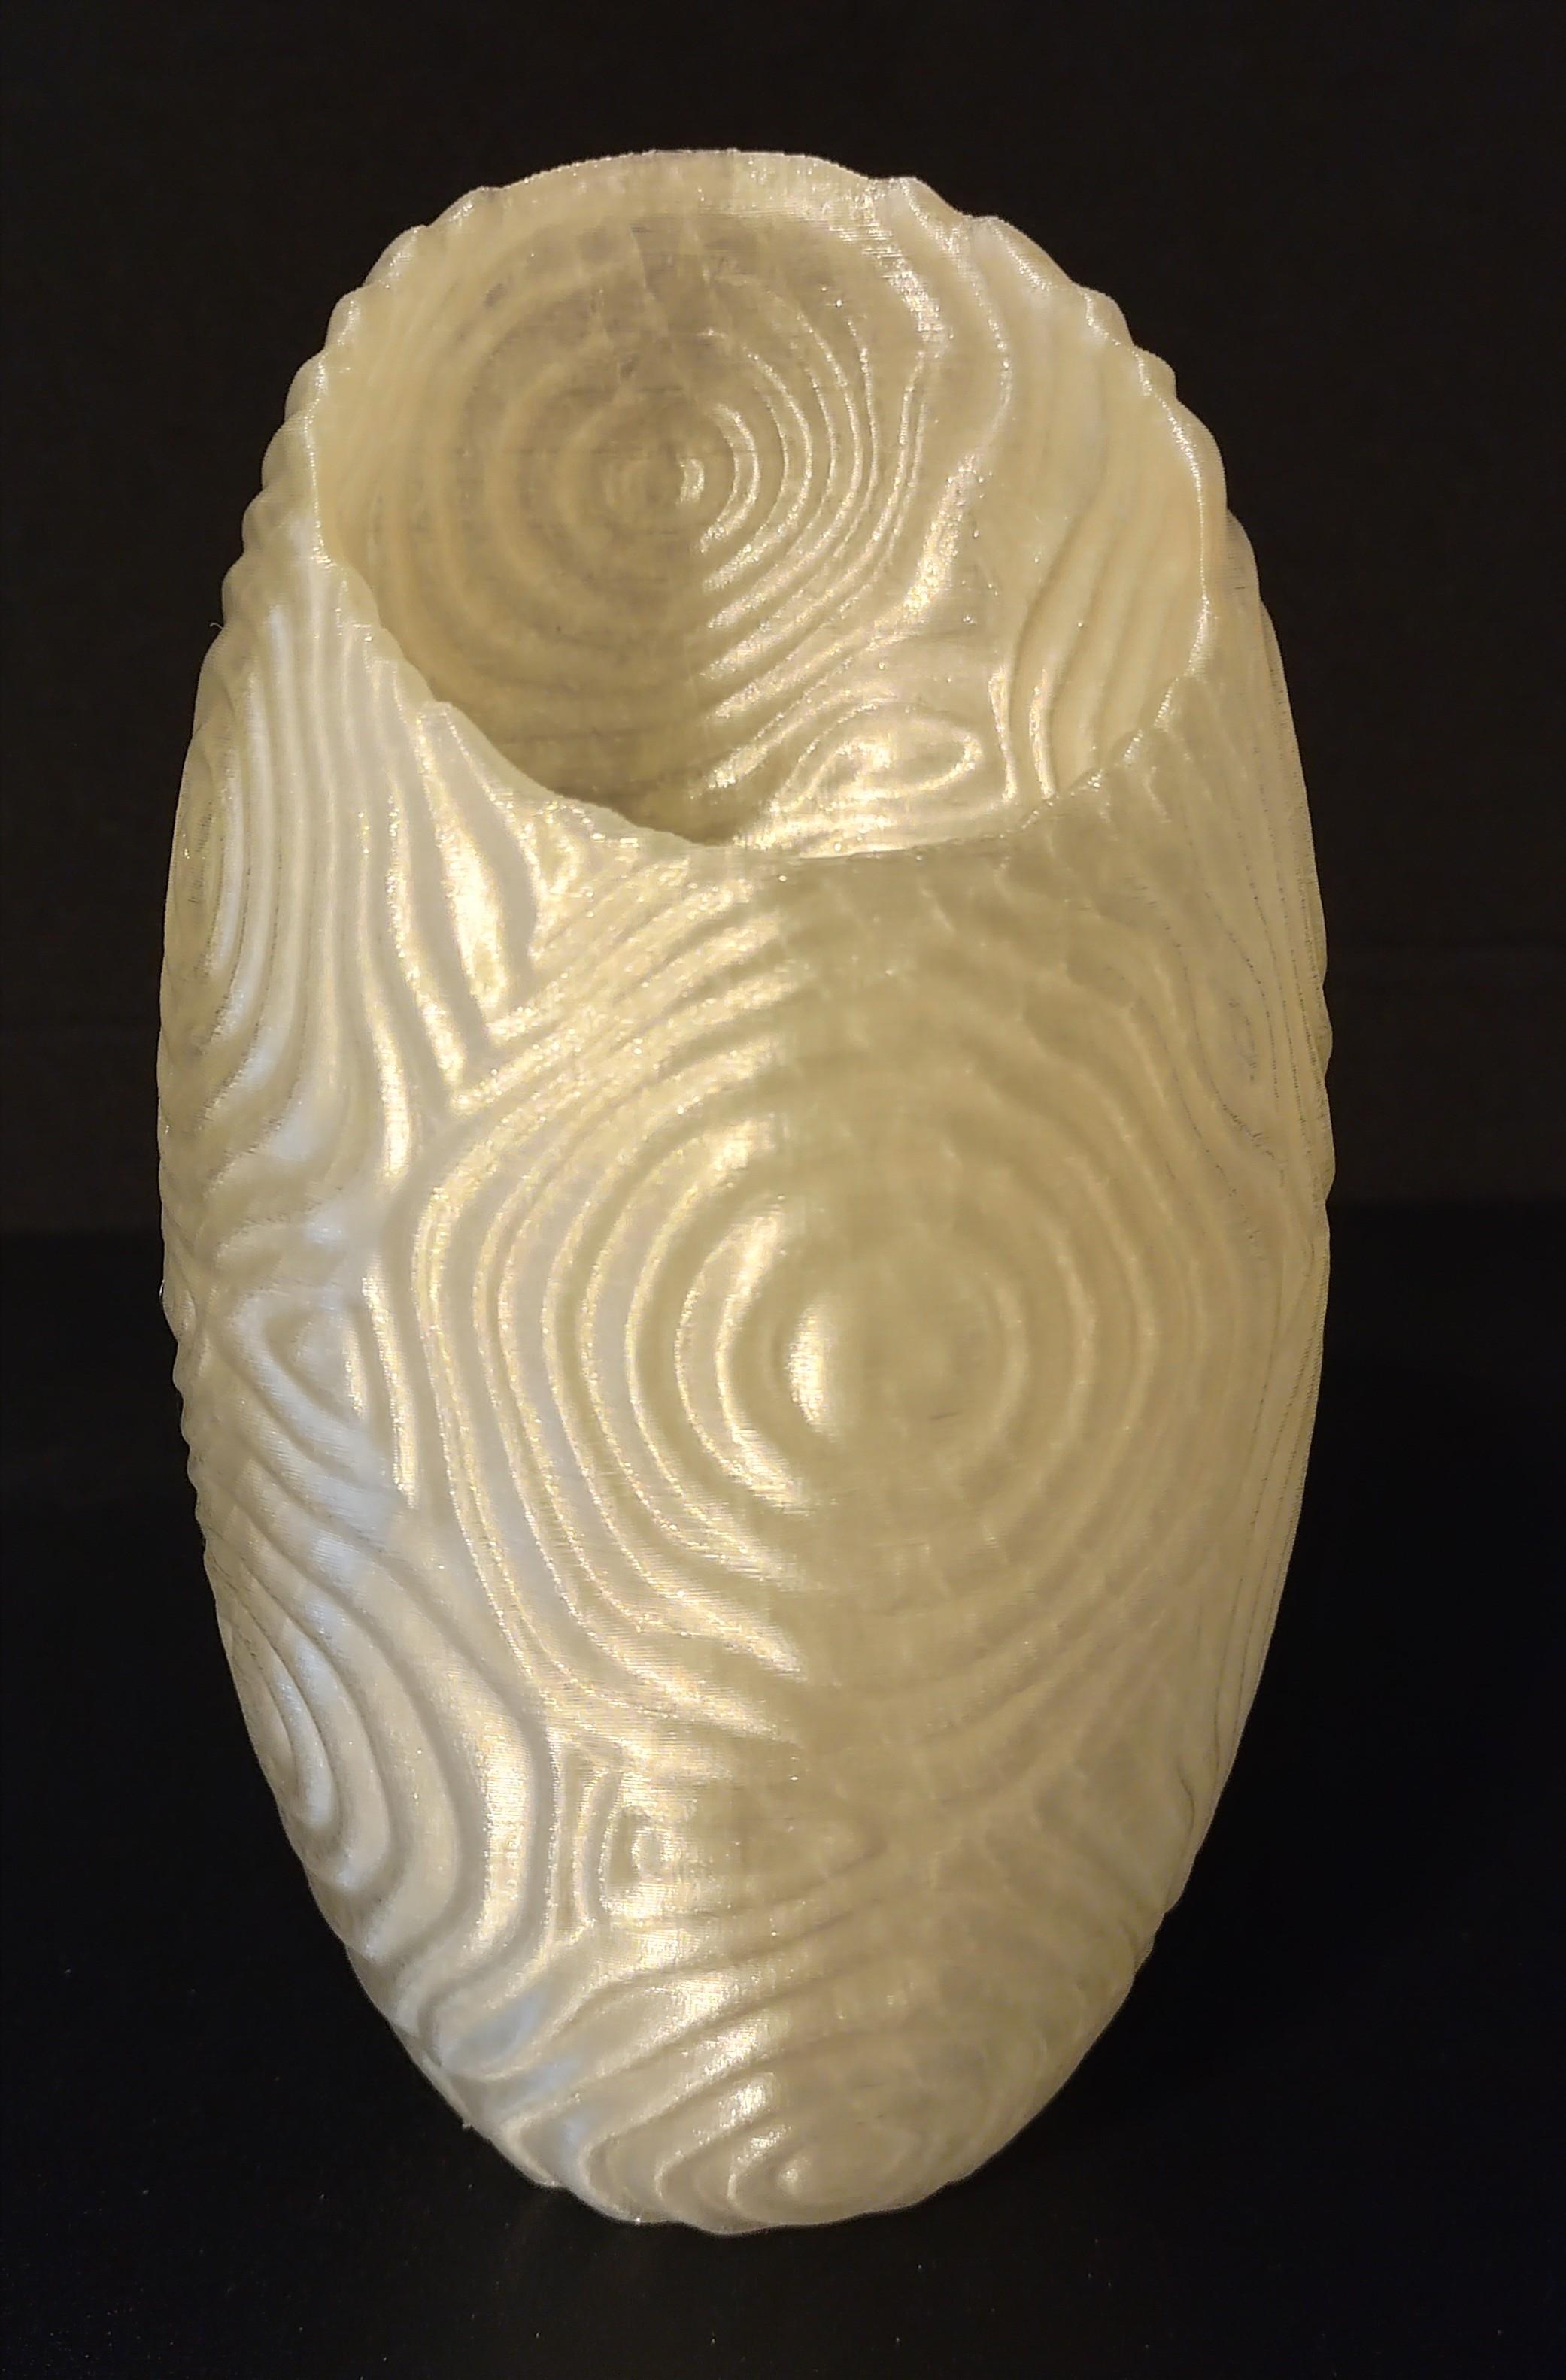 Ripple Vase (Ovoid) - Thanks for sharing your beautiful design! Printed perfectly on my Ender 3 on 8/30/2022. - 3d model